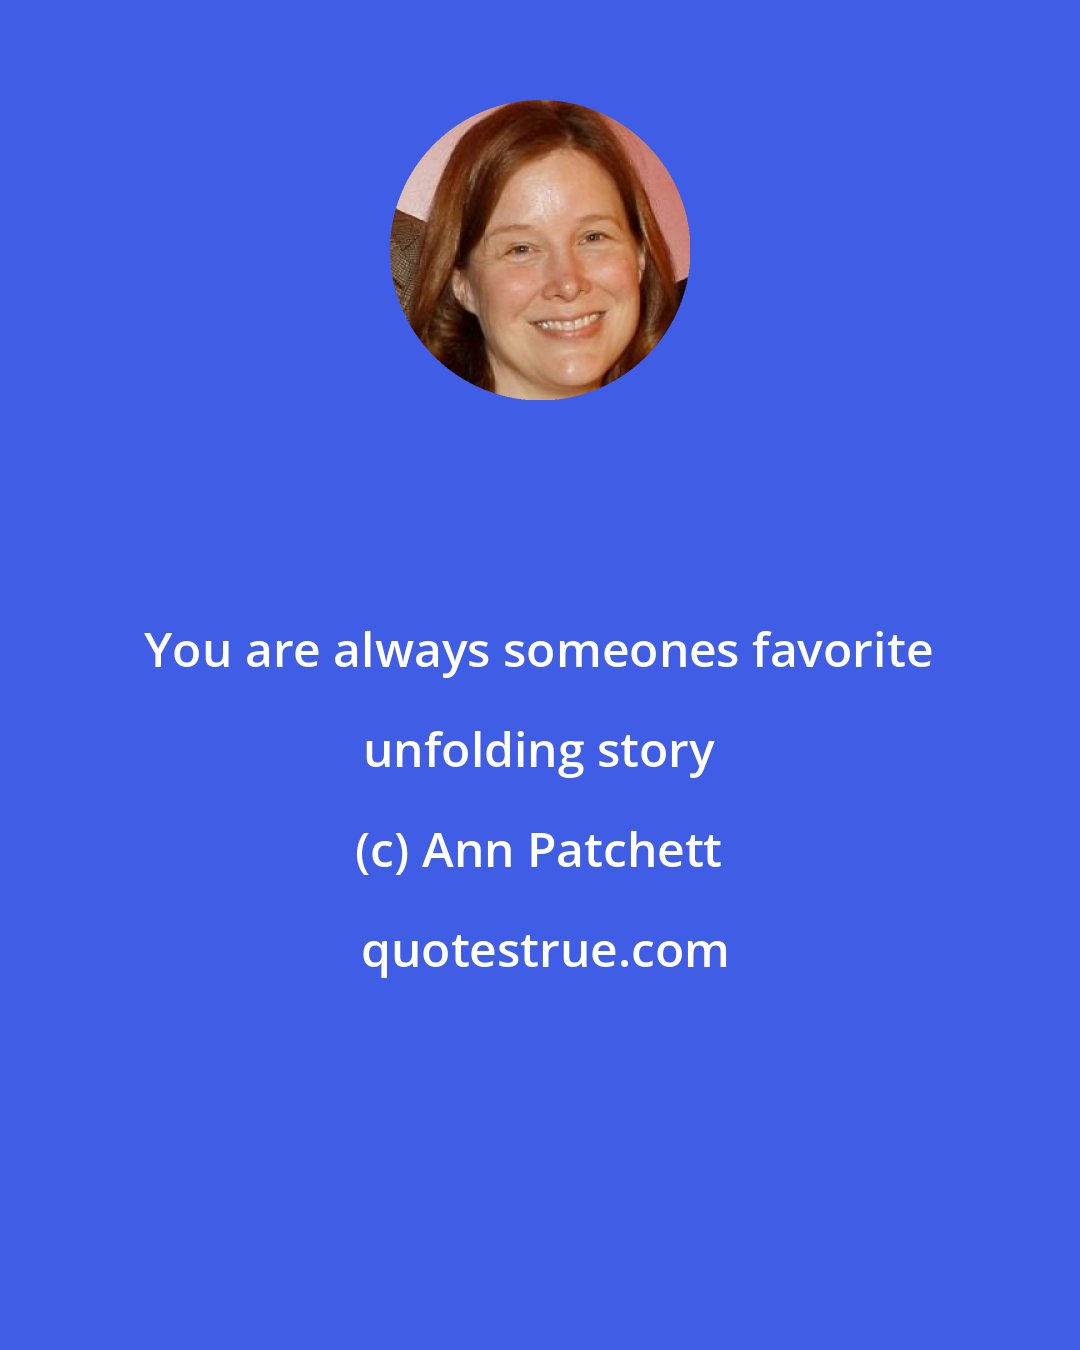 Ann Patchett: You are always someones favorite unfolding story